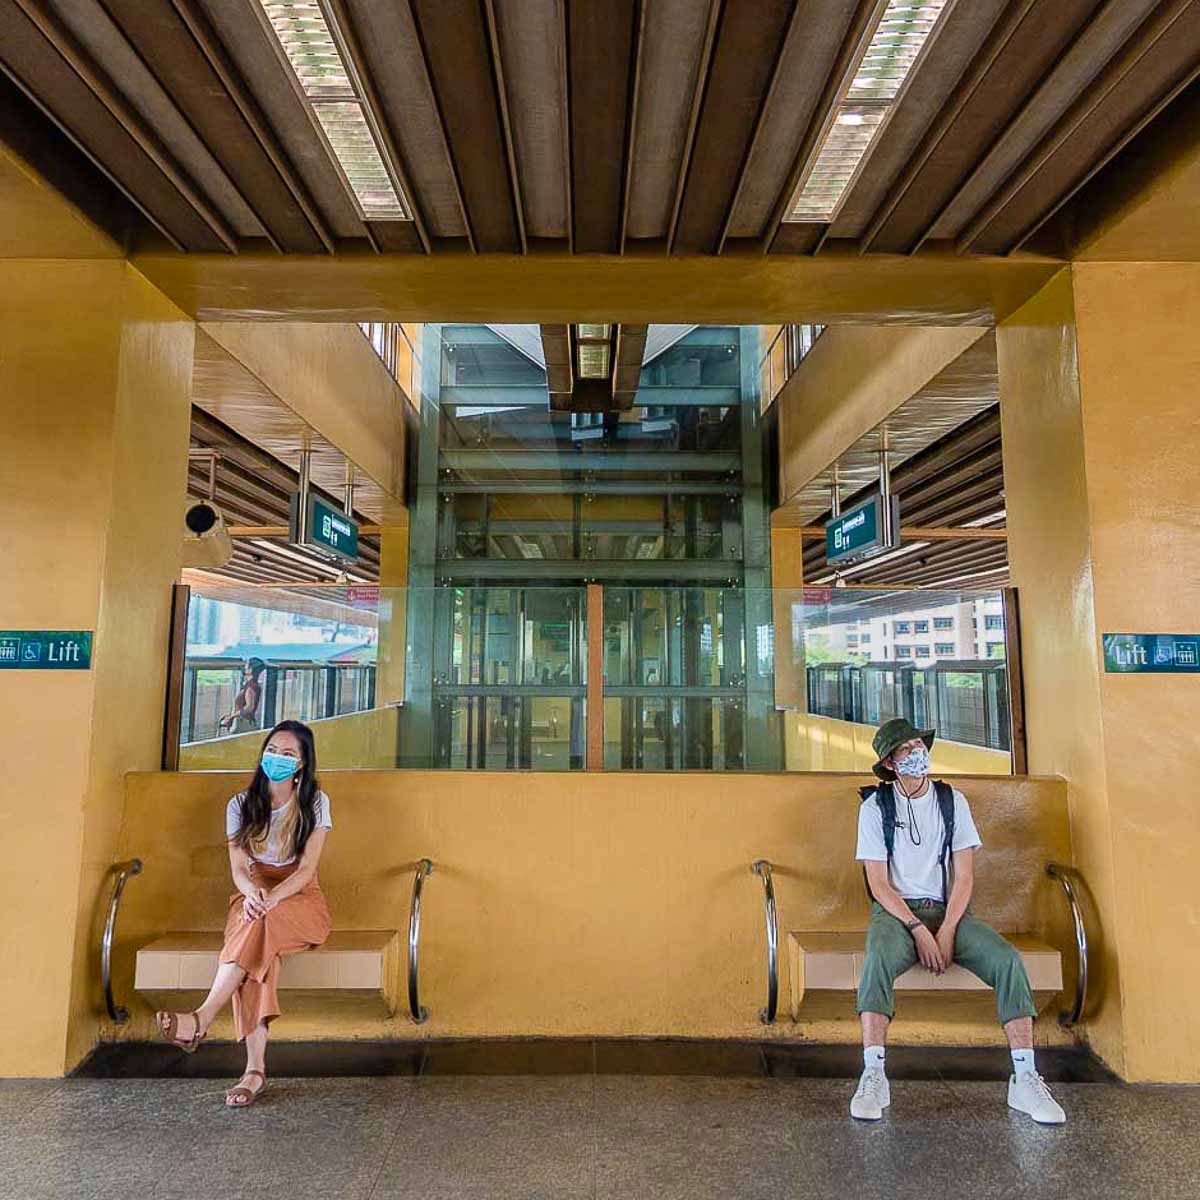 9 of SG’s Most Instagrammable MRT Stations — Some Don’t Look Like Singapore